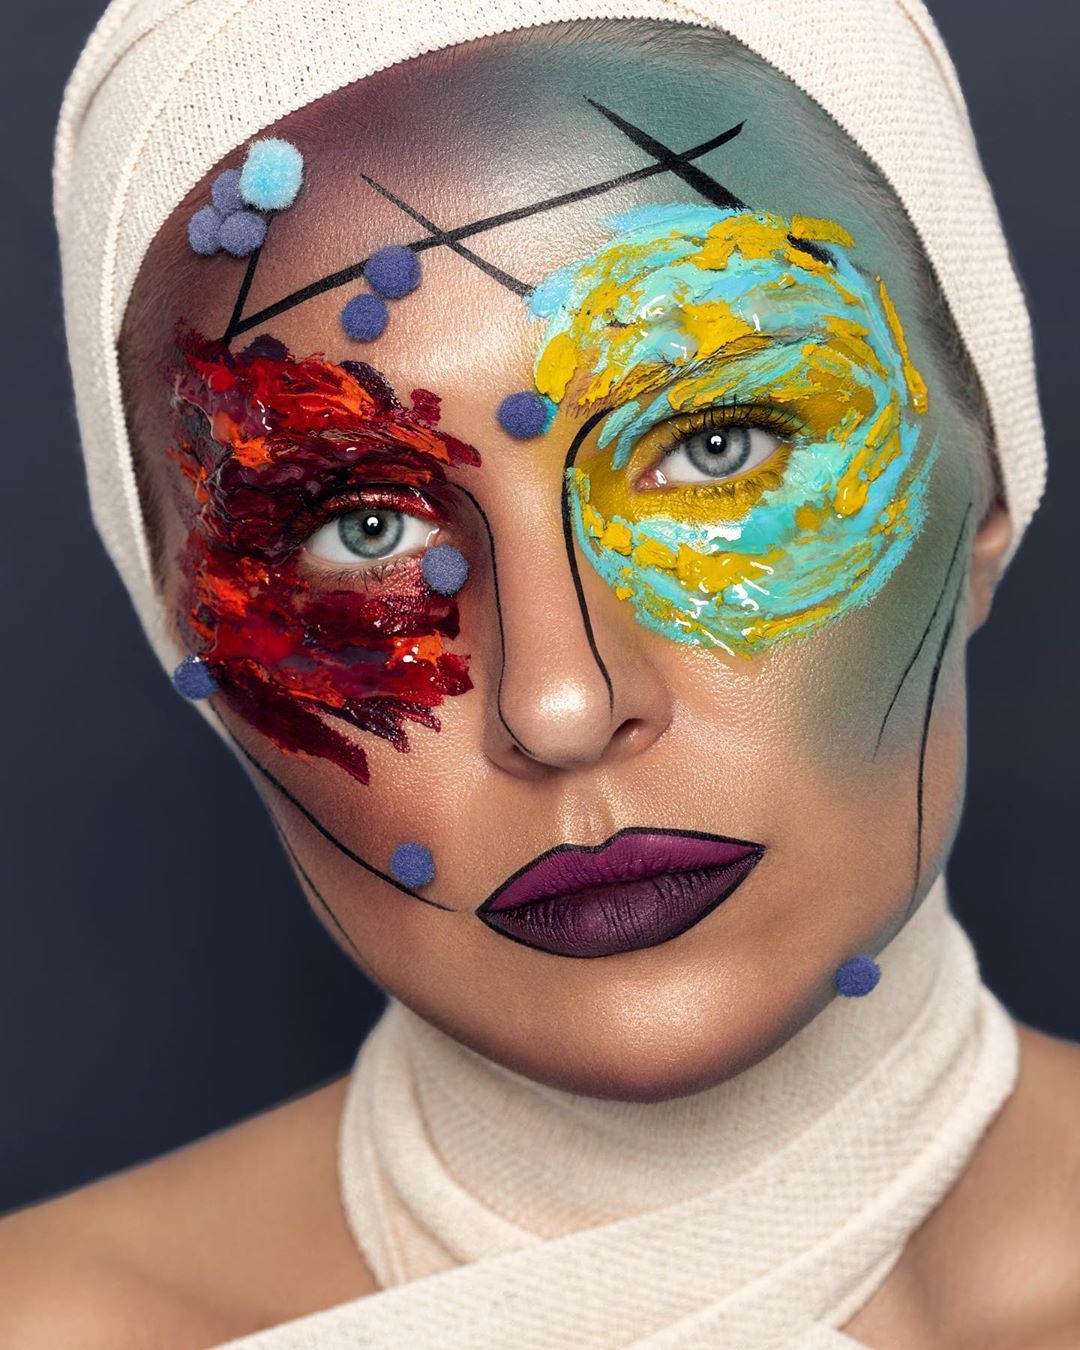 Young Lady With Creative Bright Make Up